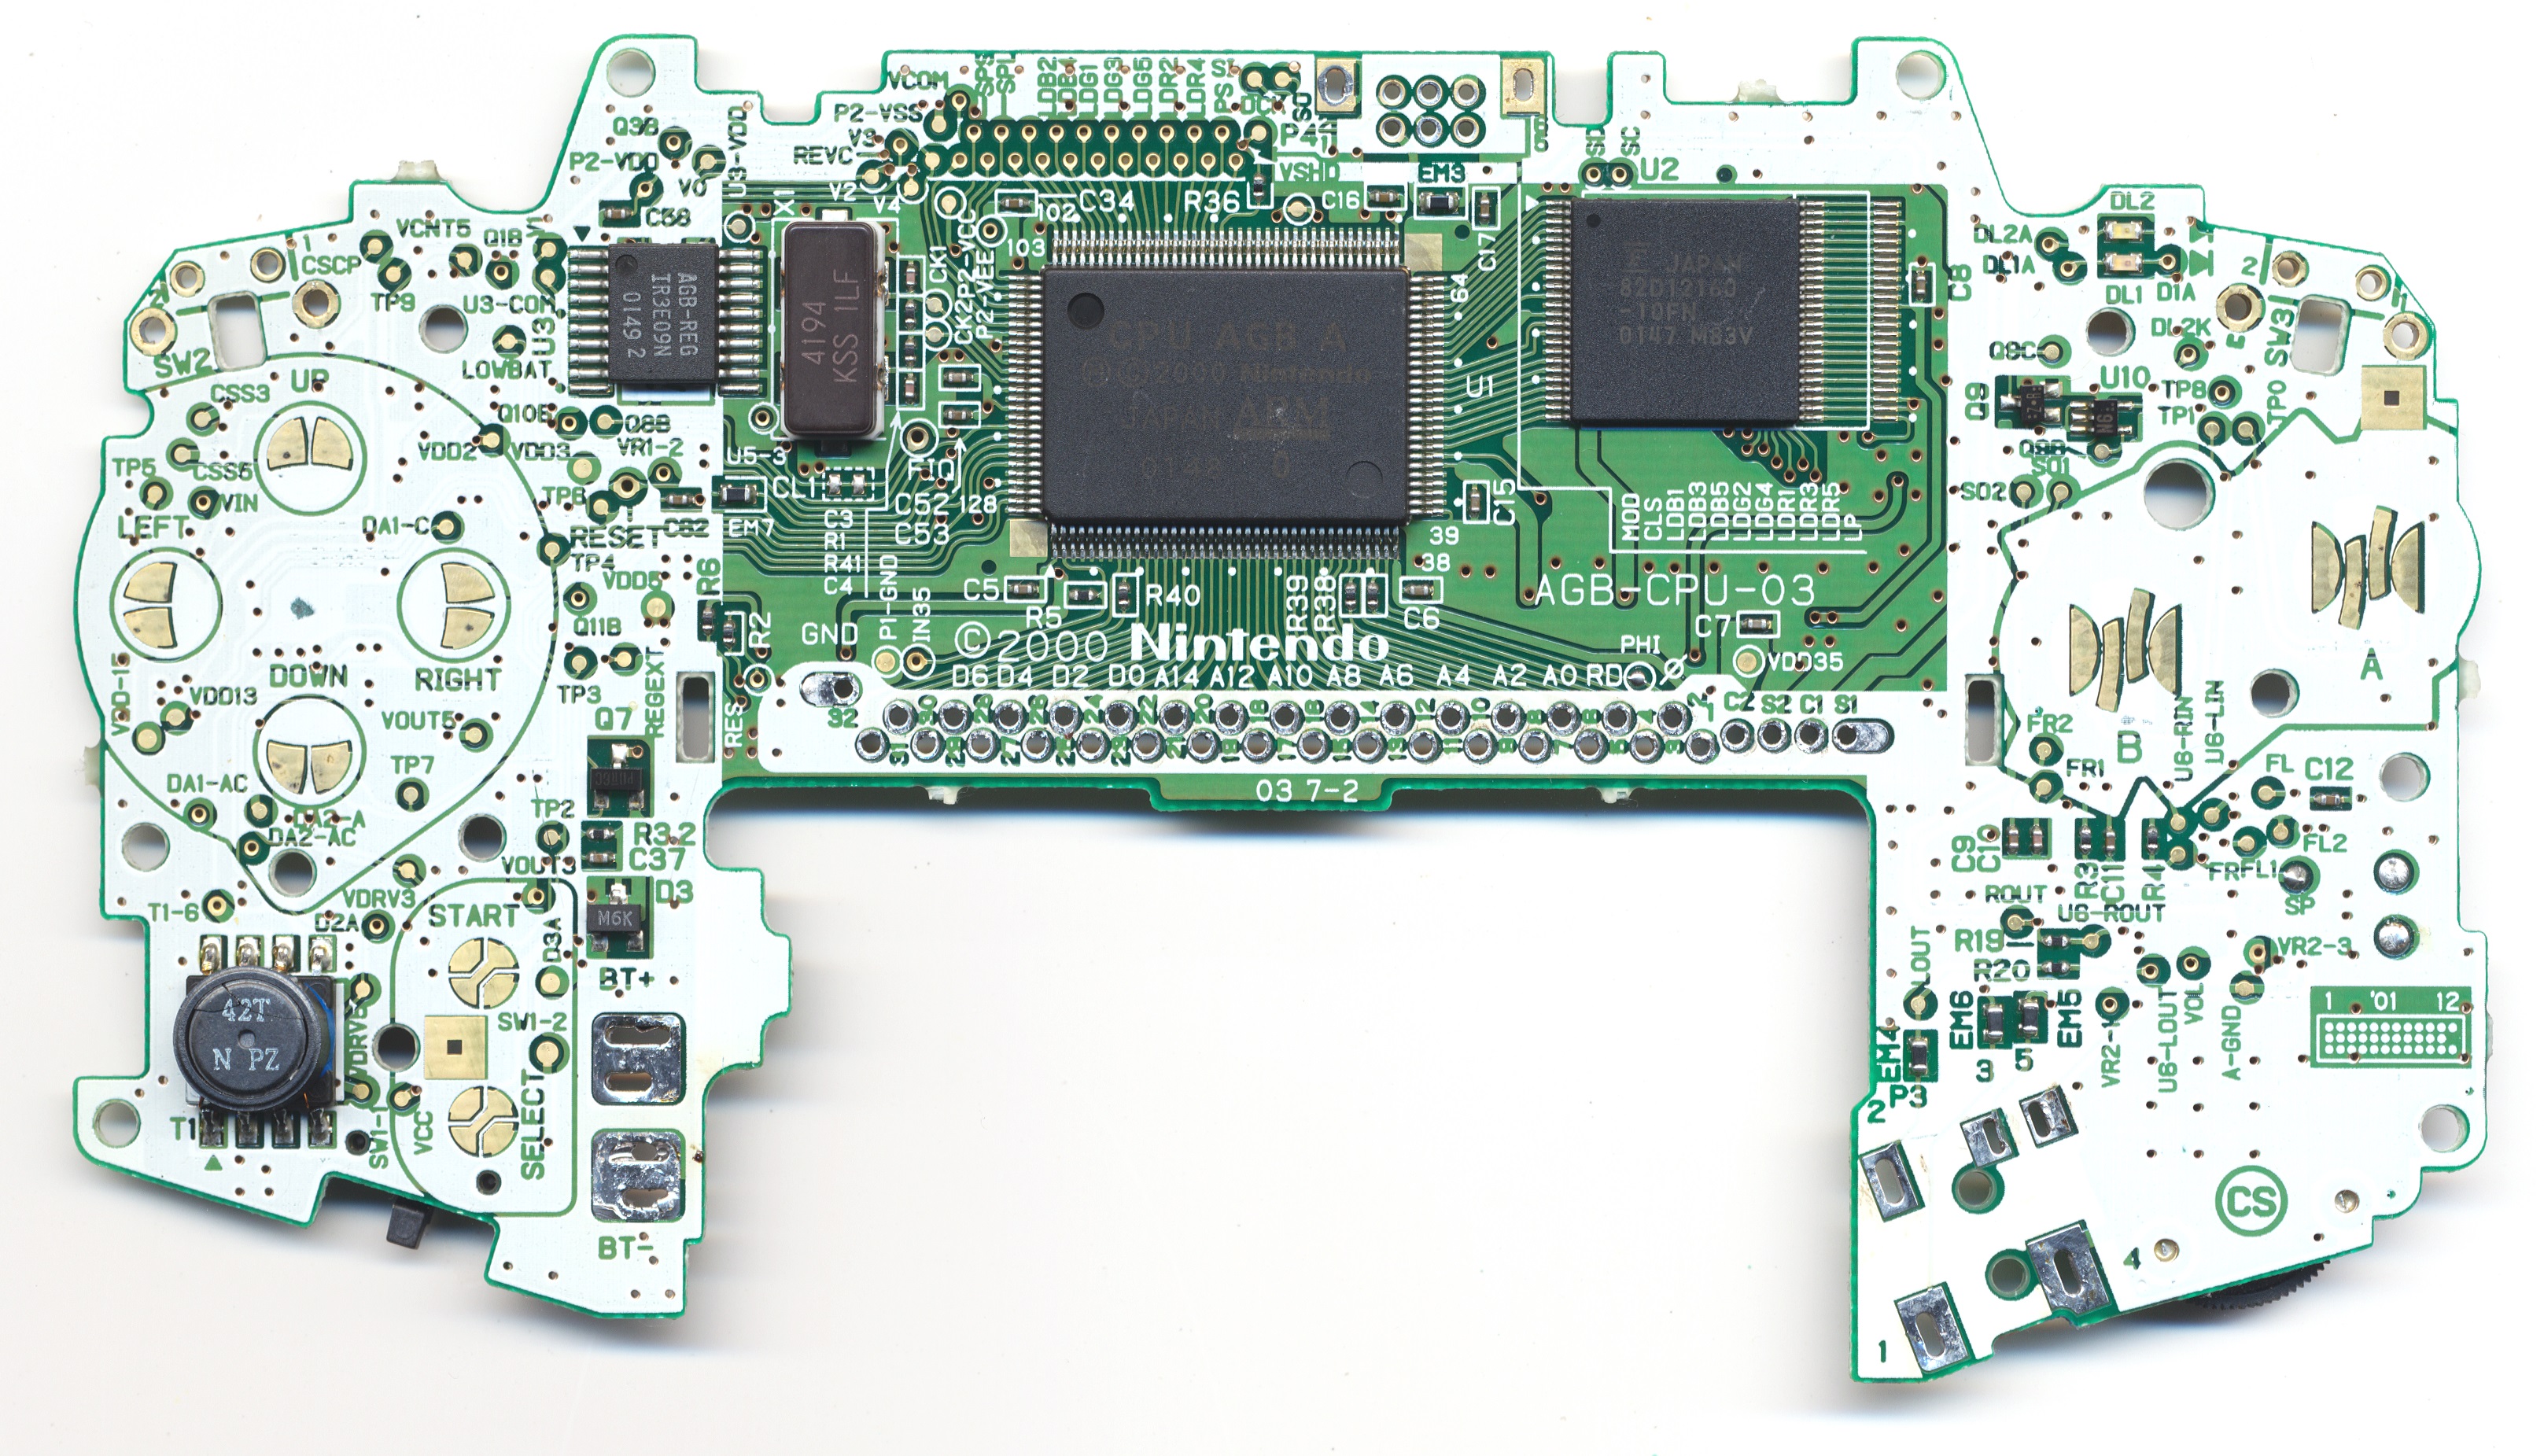 GAME_BOY_ADVANCE_AGB-CPU-03_TOP_WITH_PARTS_PCB_SCAN_ATV.jpg